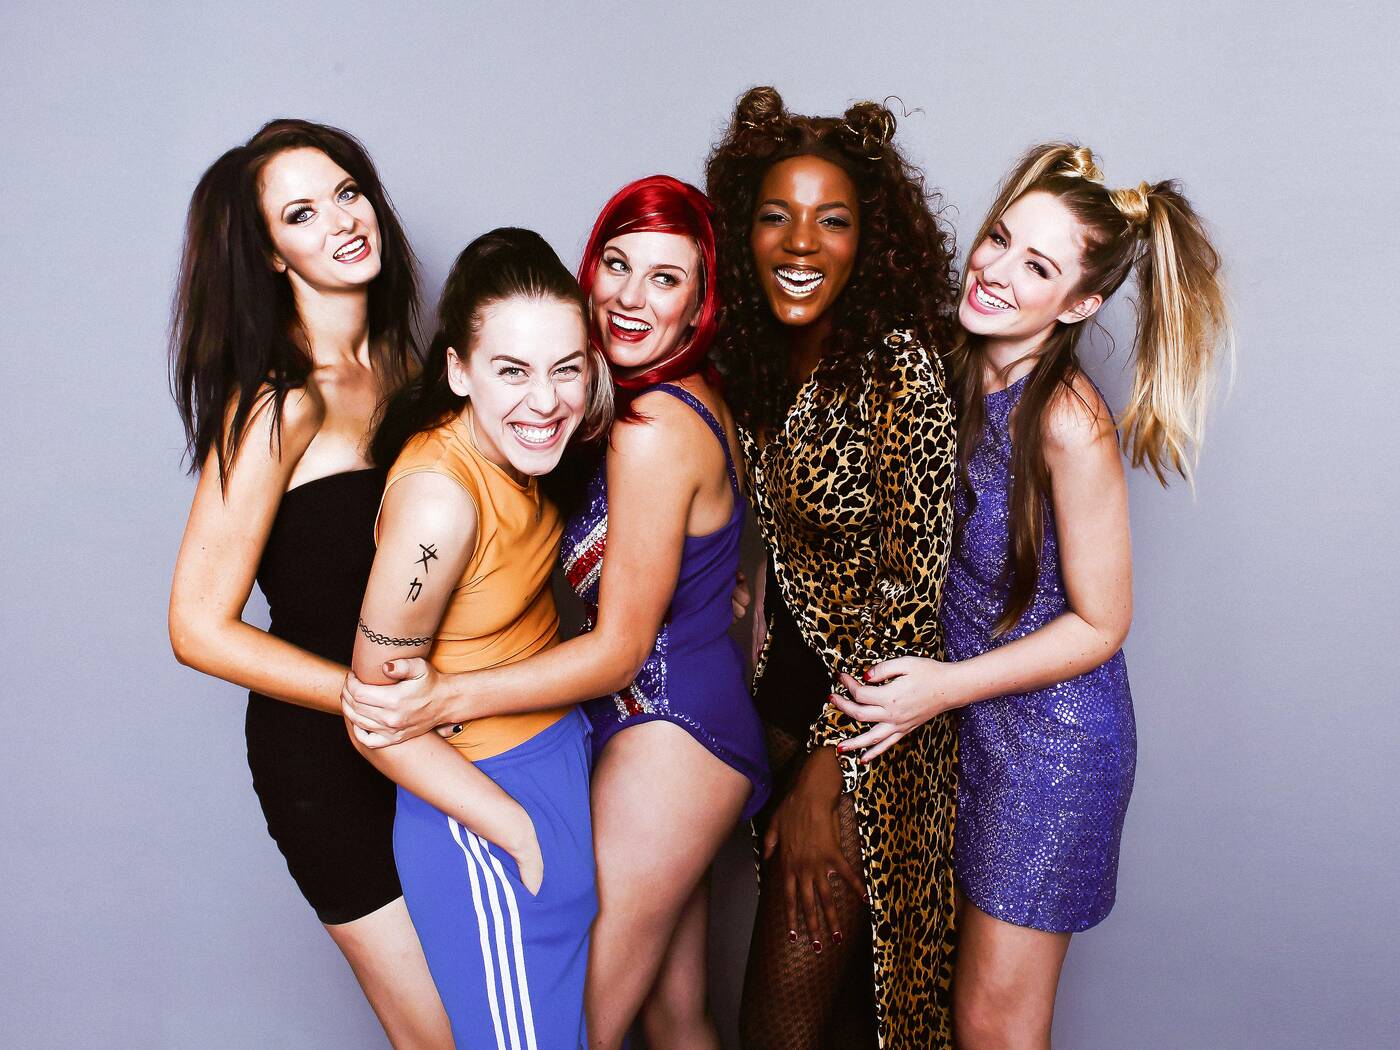 Spice Girls - Spice Up Your Life.